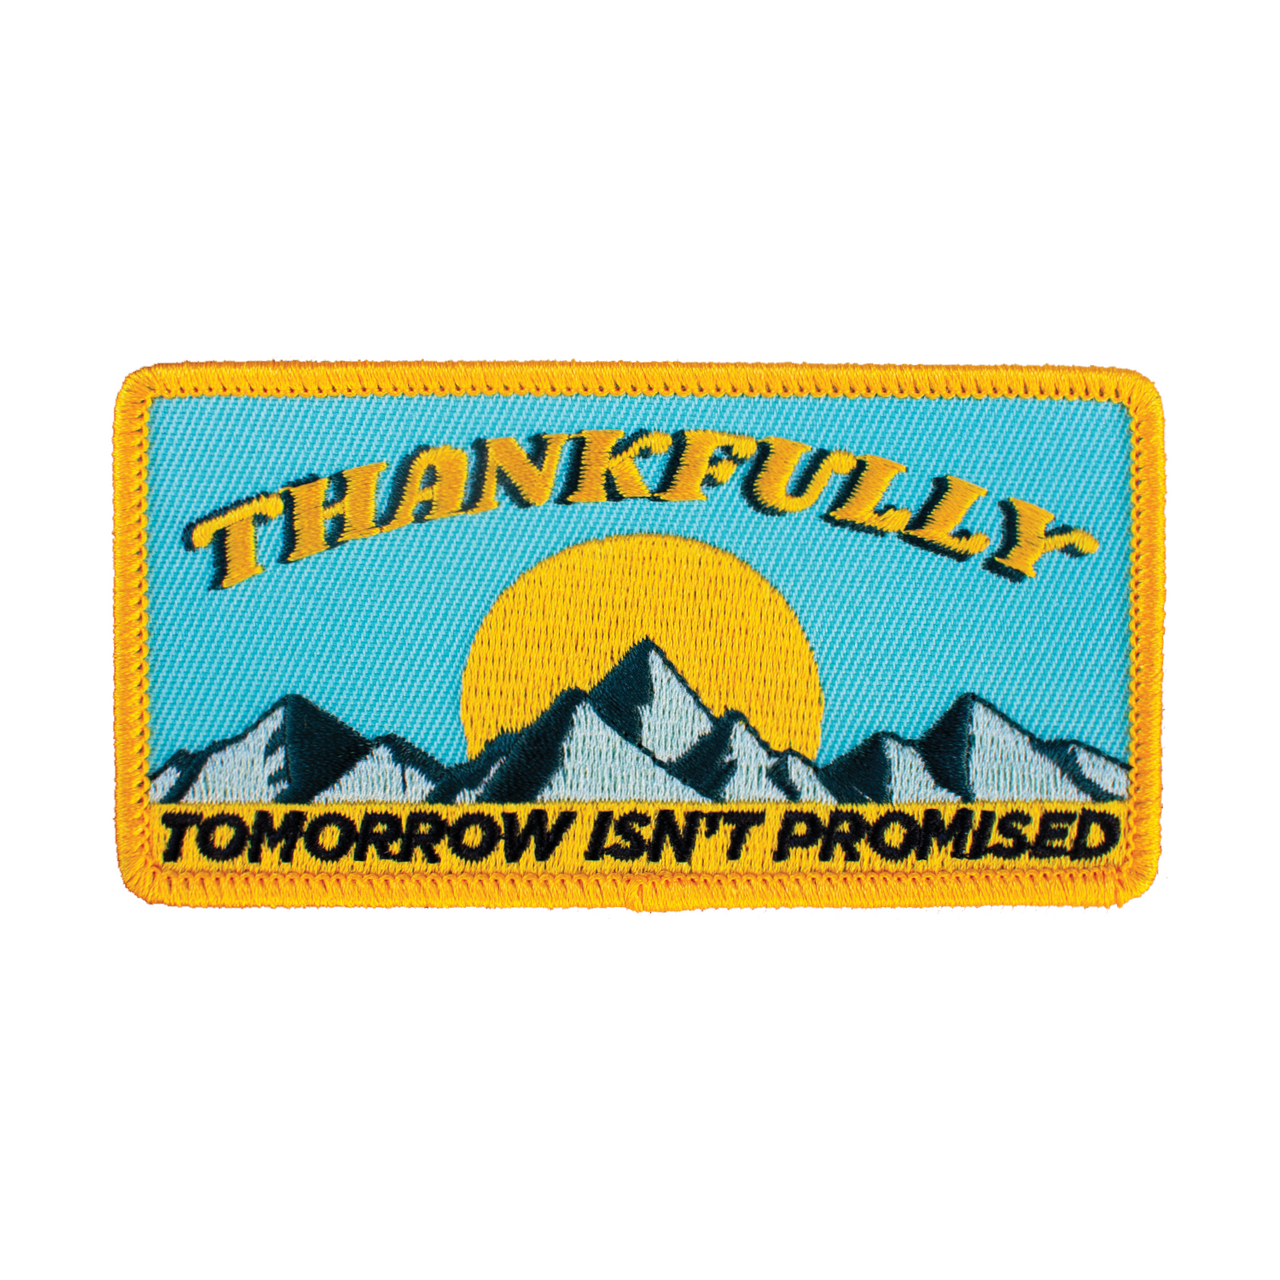 Thankfully Tomorrow Isn't Promised (Iron-On Patch)